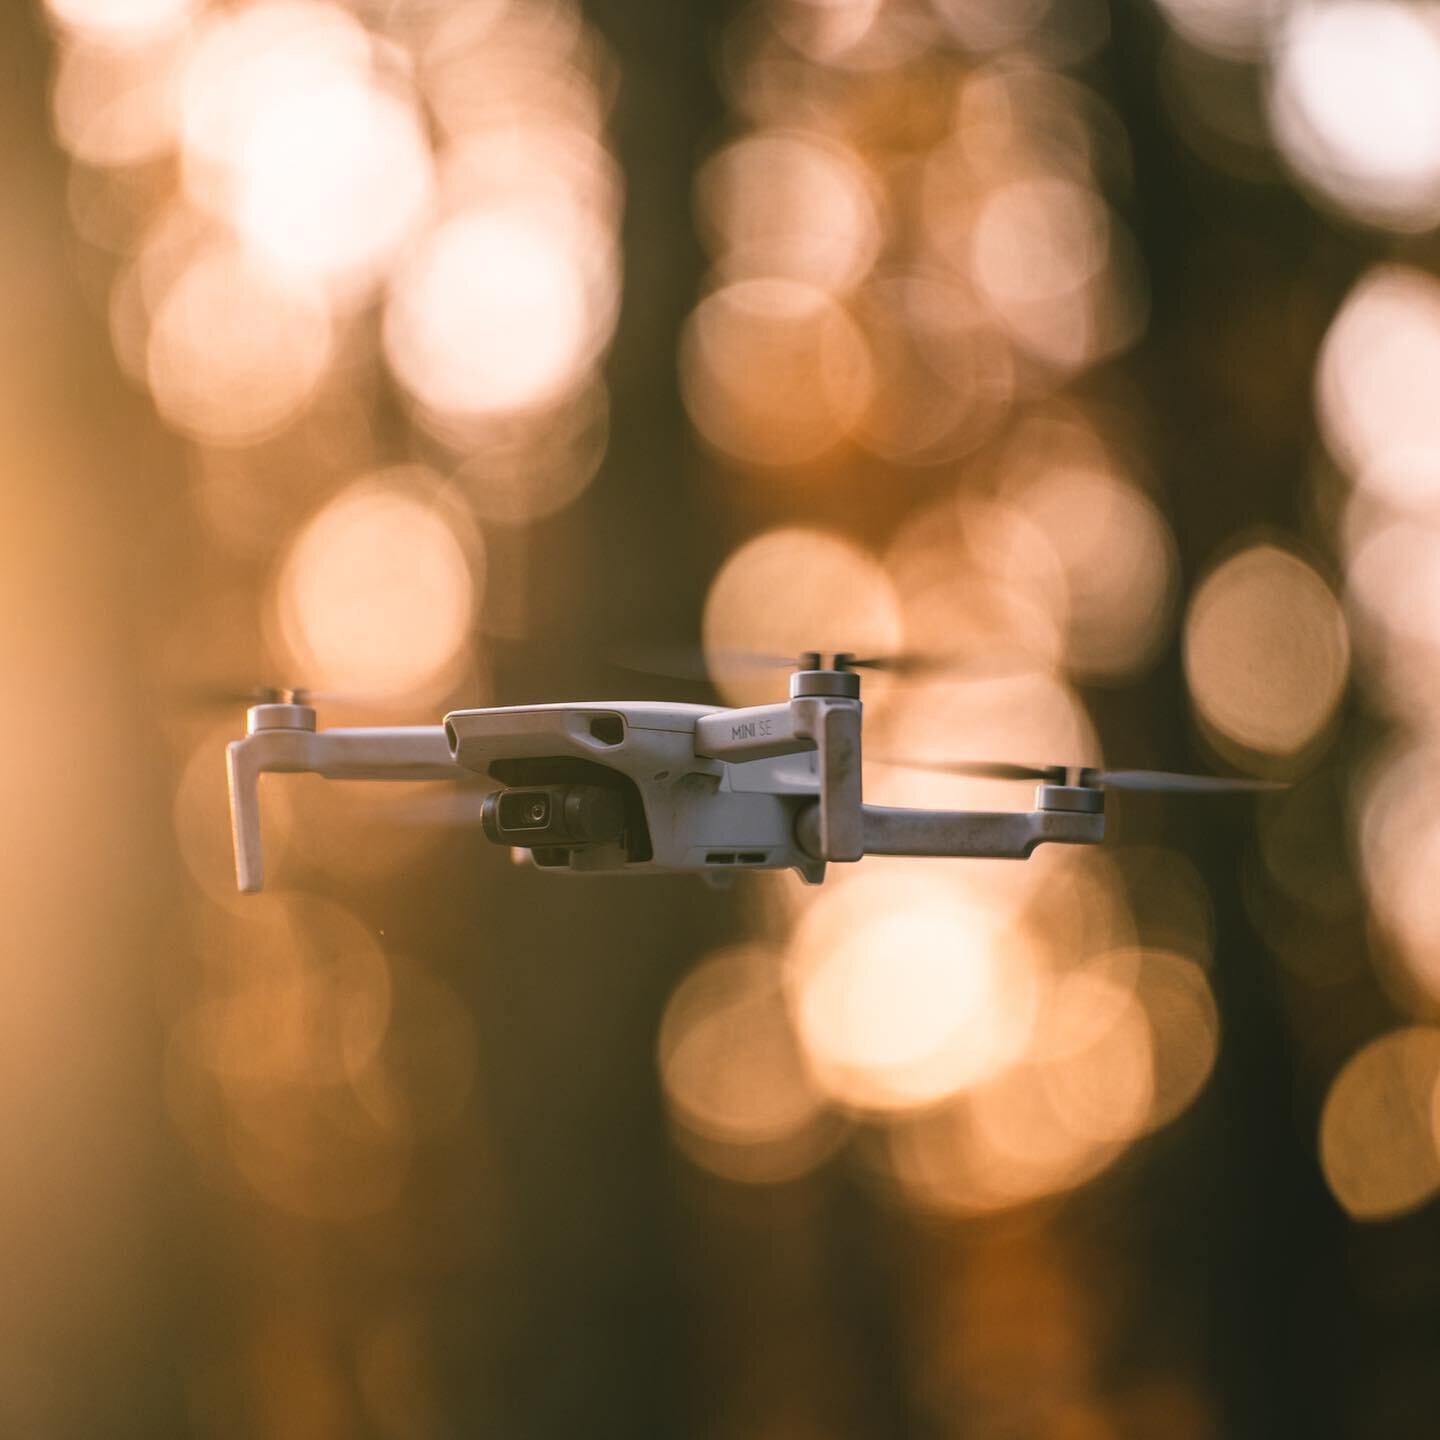 PCT Gear: DJI Mavic Mini SE

The one piece of gear I carried that I feel like I didn&rsquo;t utilize enough. Largely due to the fact that it&rsquo;s not legal to fly these things most places along the PCT. 

At 249 grams though, it&rsquo;s weight I b